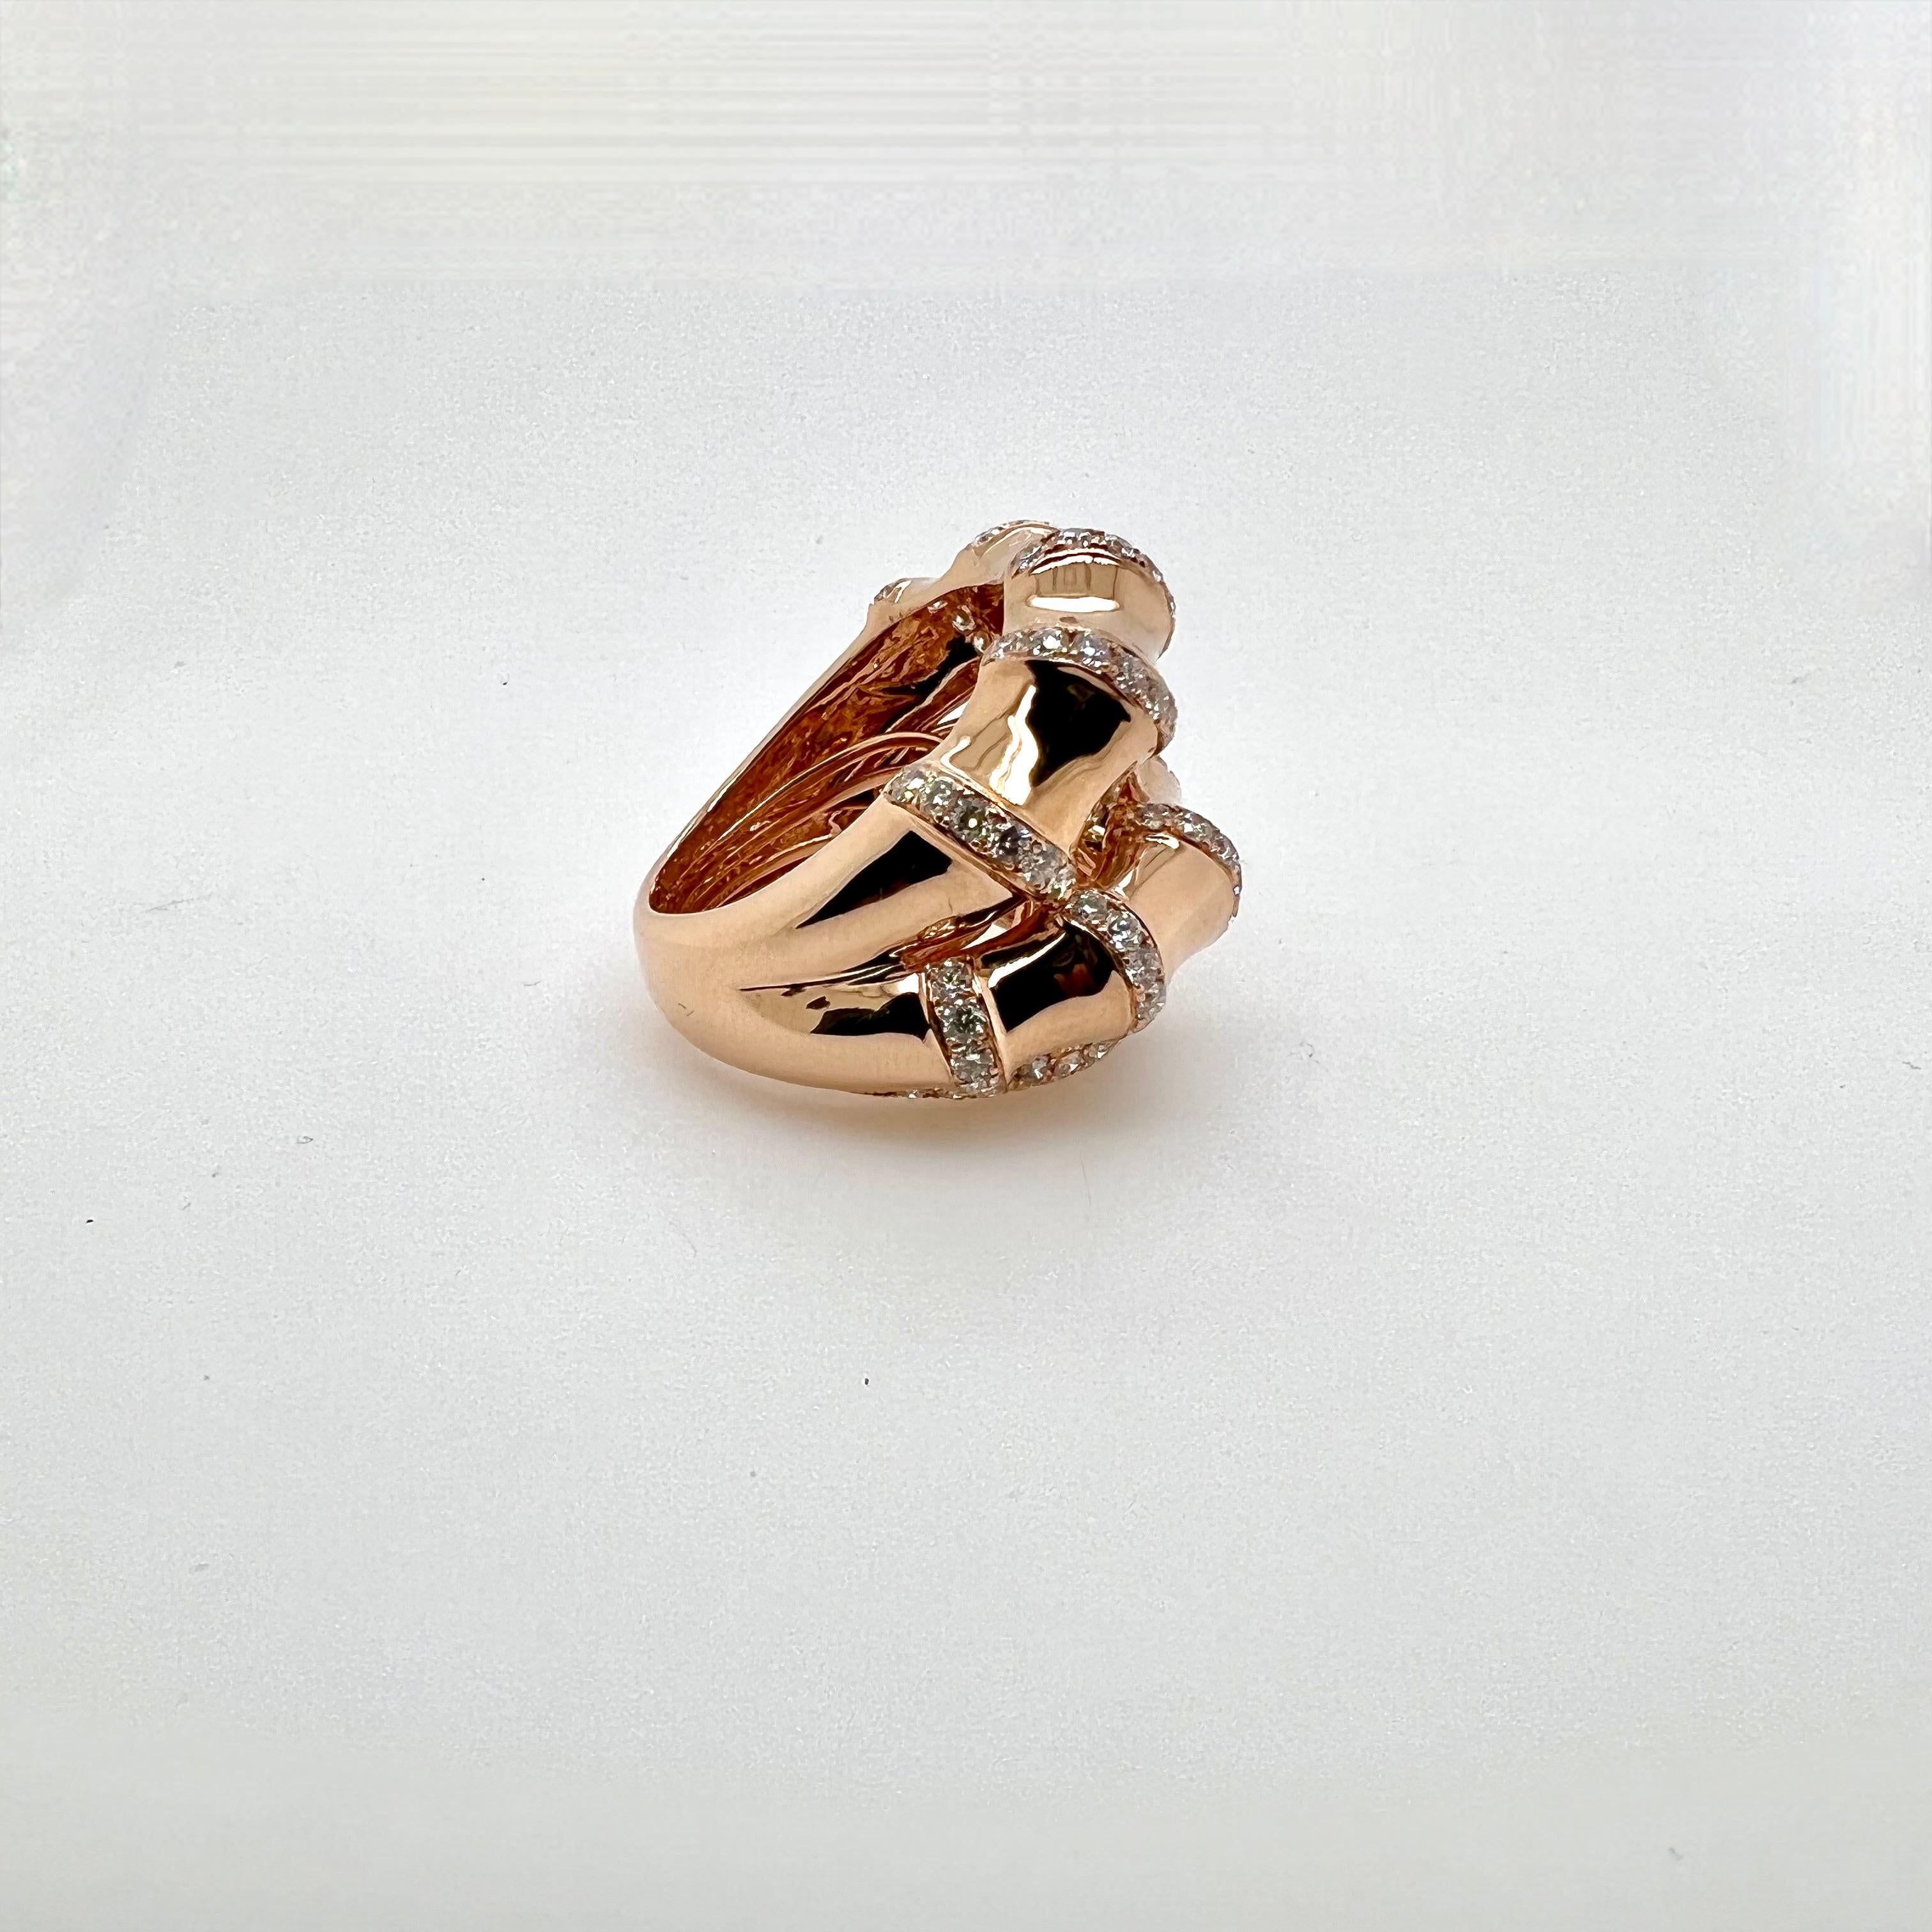 Round Cut 18k Rose Gold Bamboo Style Diamond Cocktail Ring Band